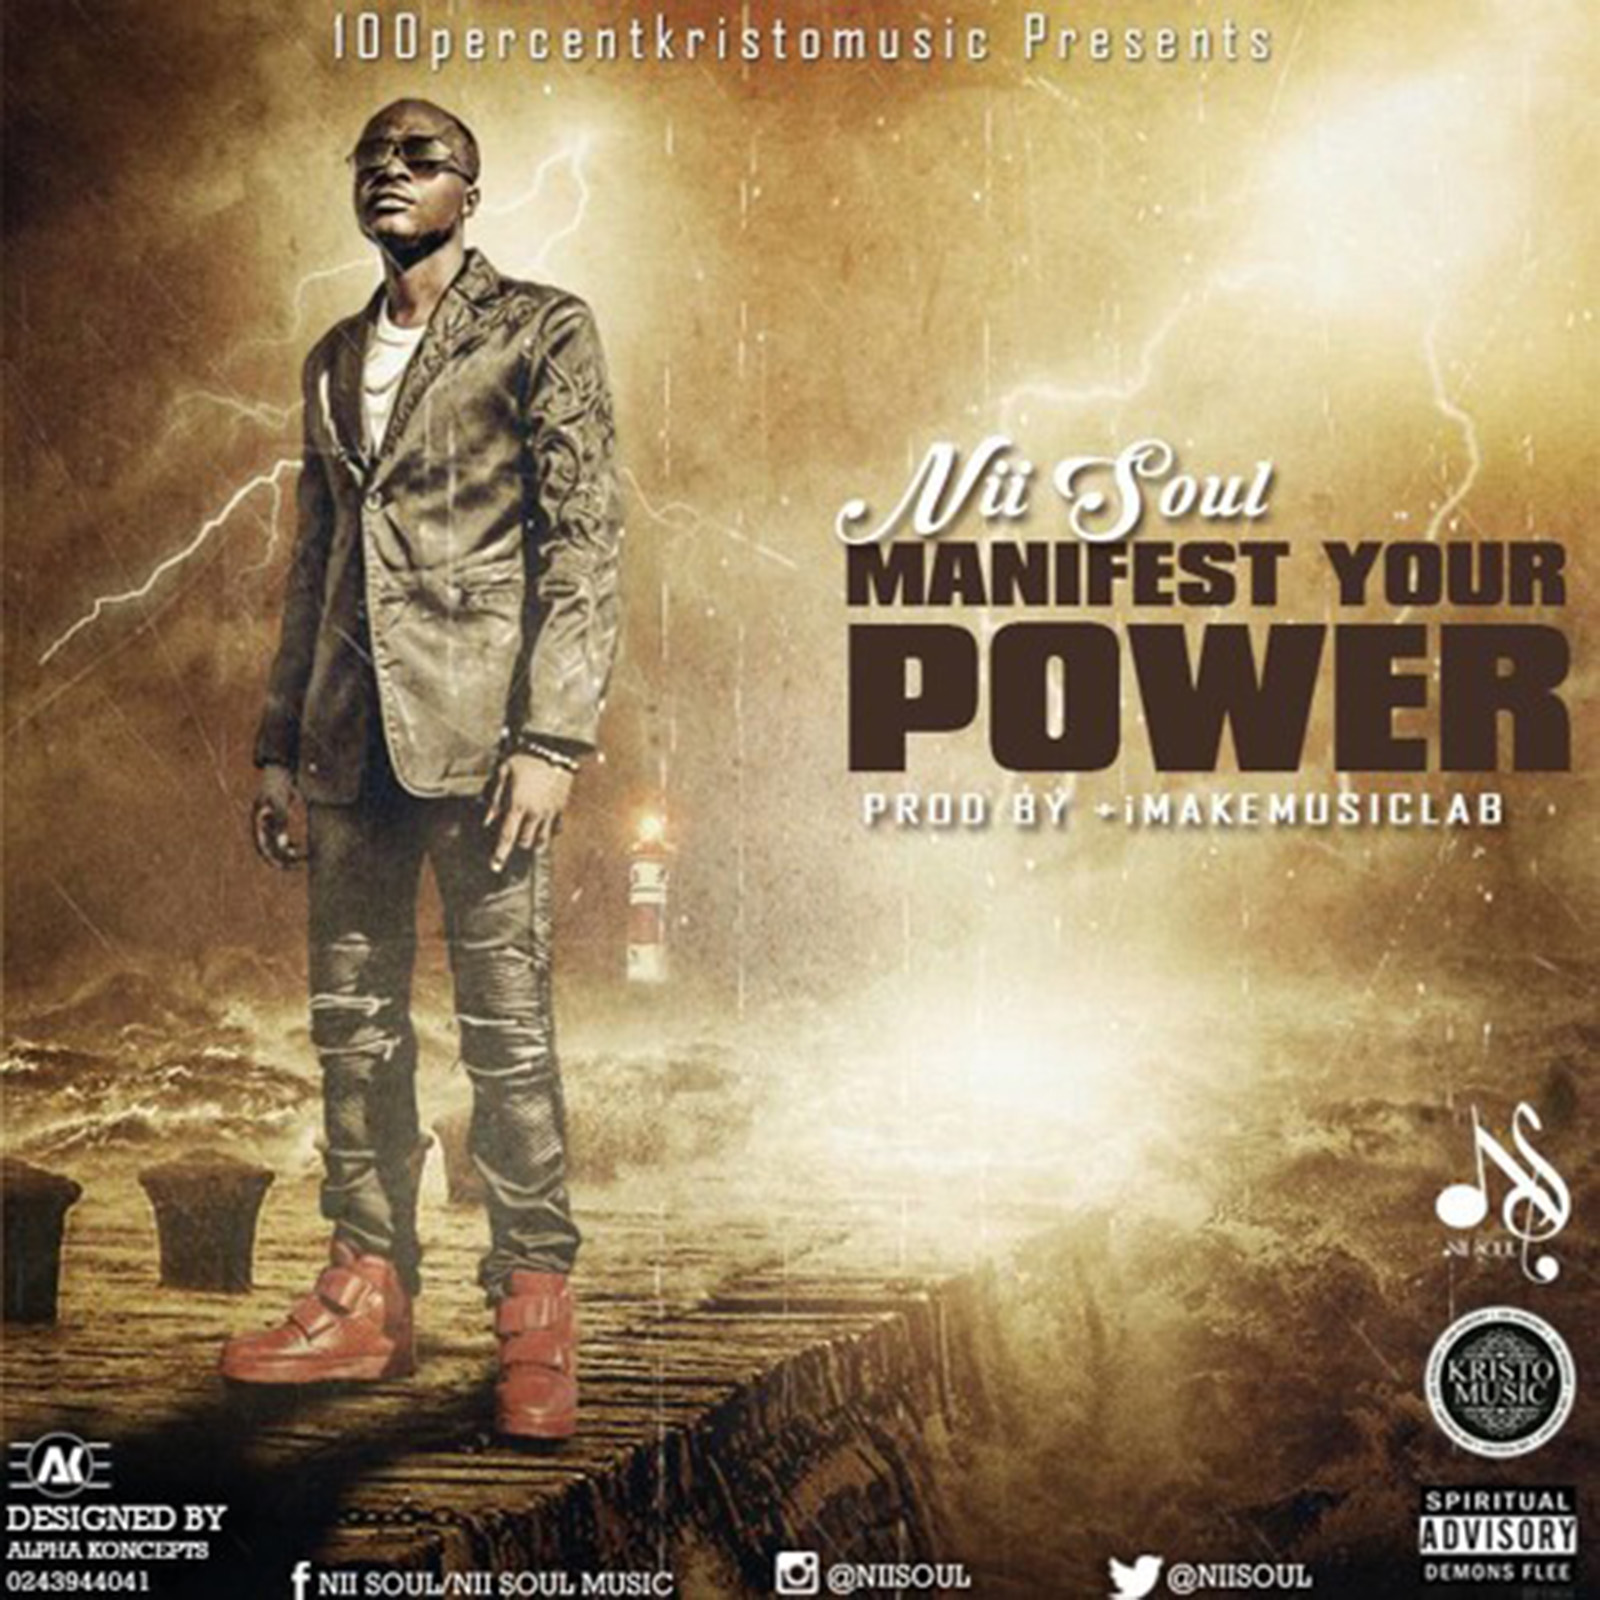 Manifest Your Power by Nii Soul